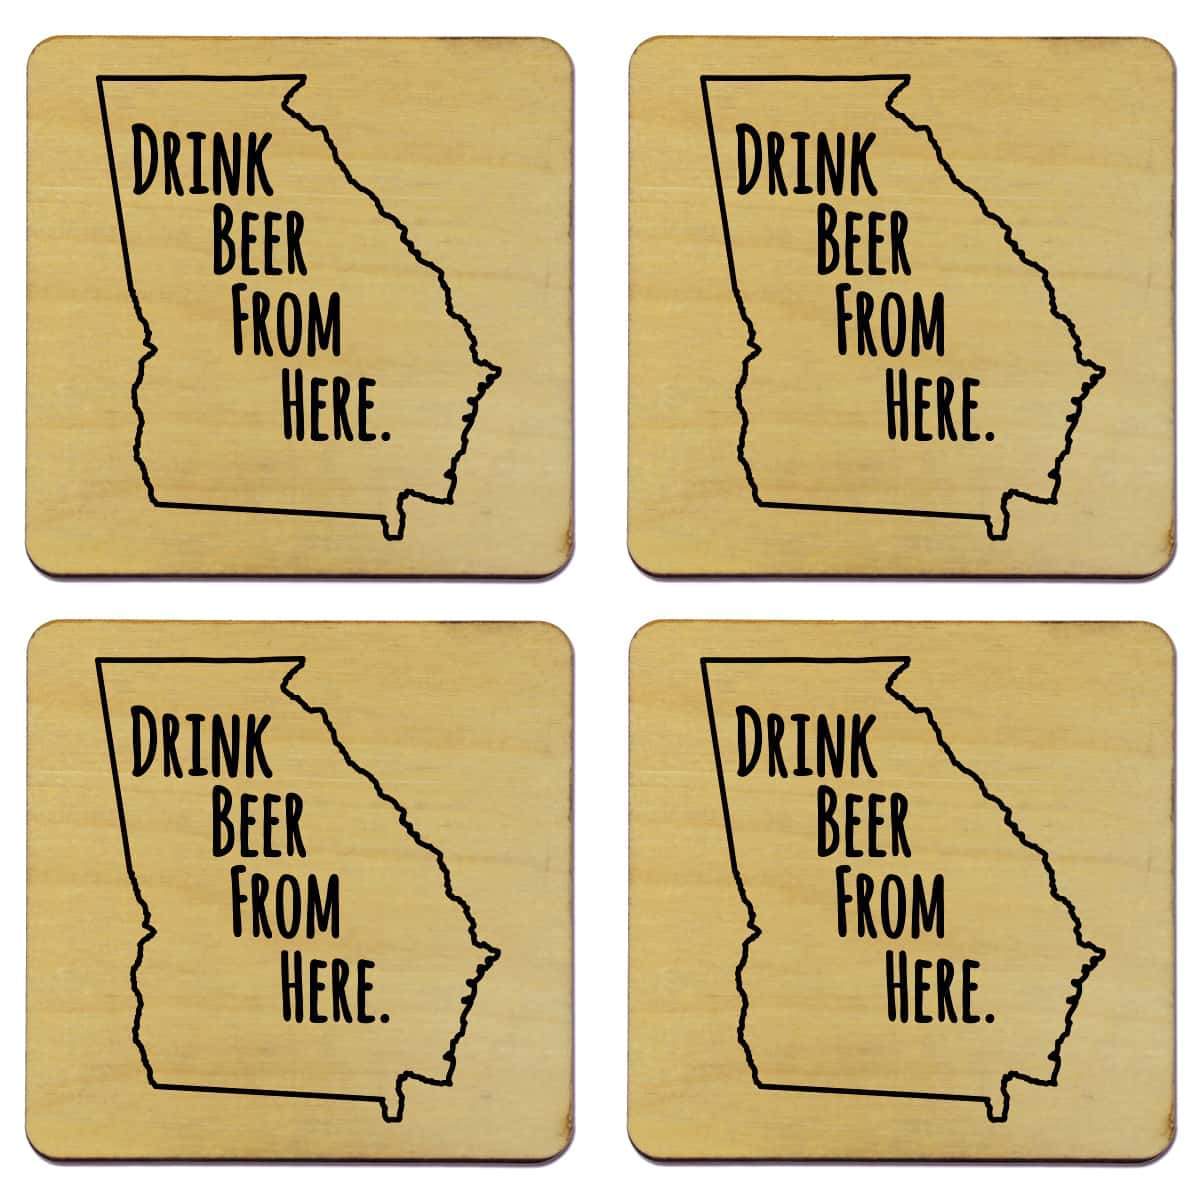 drink beer from here font georgia